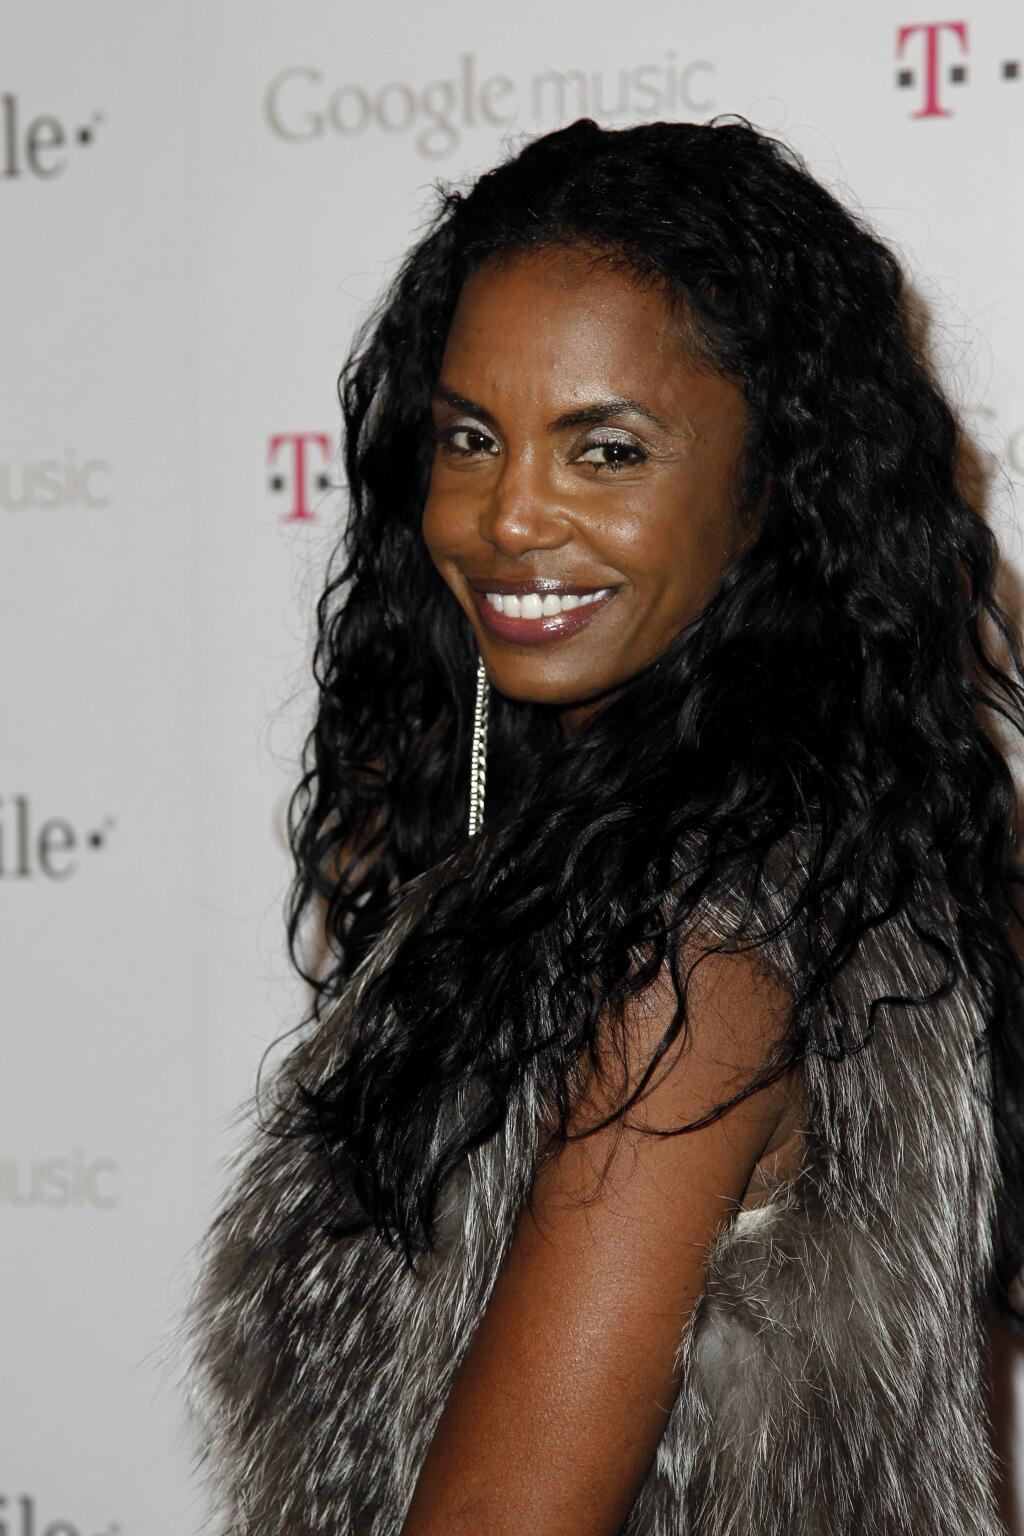 File-This Nov. 16, 2011, file photo shows Kim Porter arriving at the Google and T-Mobile party celebrating the launch of Google Music, in Los Angeles. Porter, Diddy's former longtime girlfriend and the mother of three of his children, has died. A representative for Sean 'Diddy' Combs confirmed the death of the 47-year-old on Thursday, Nov. 15, 2018. No further details were immediately available. (AP Photo/Matt Sayles, File)